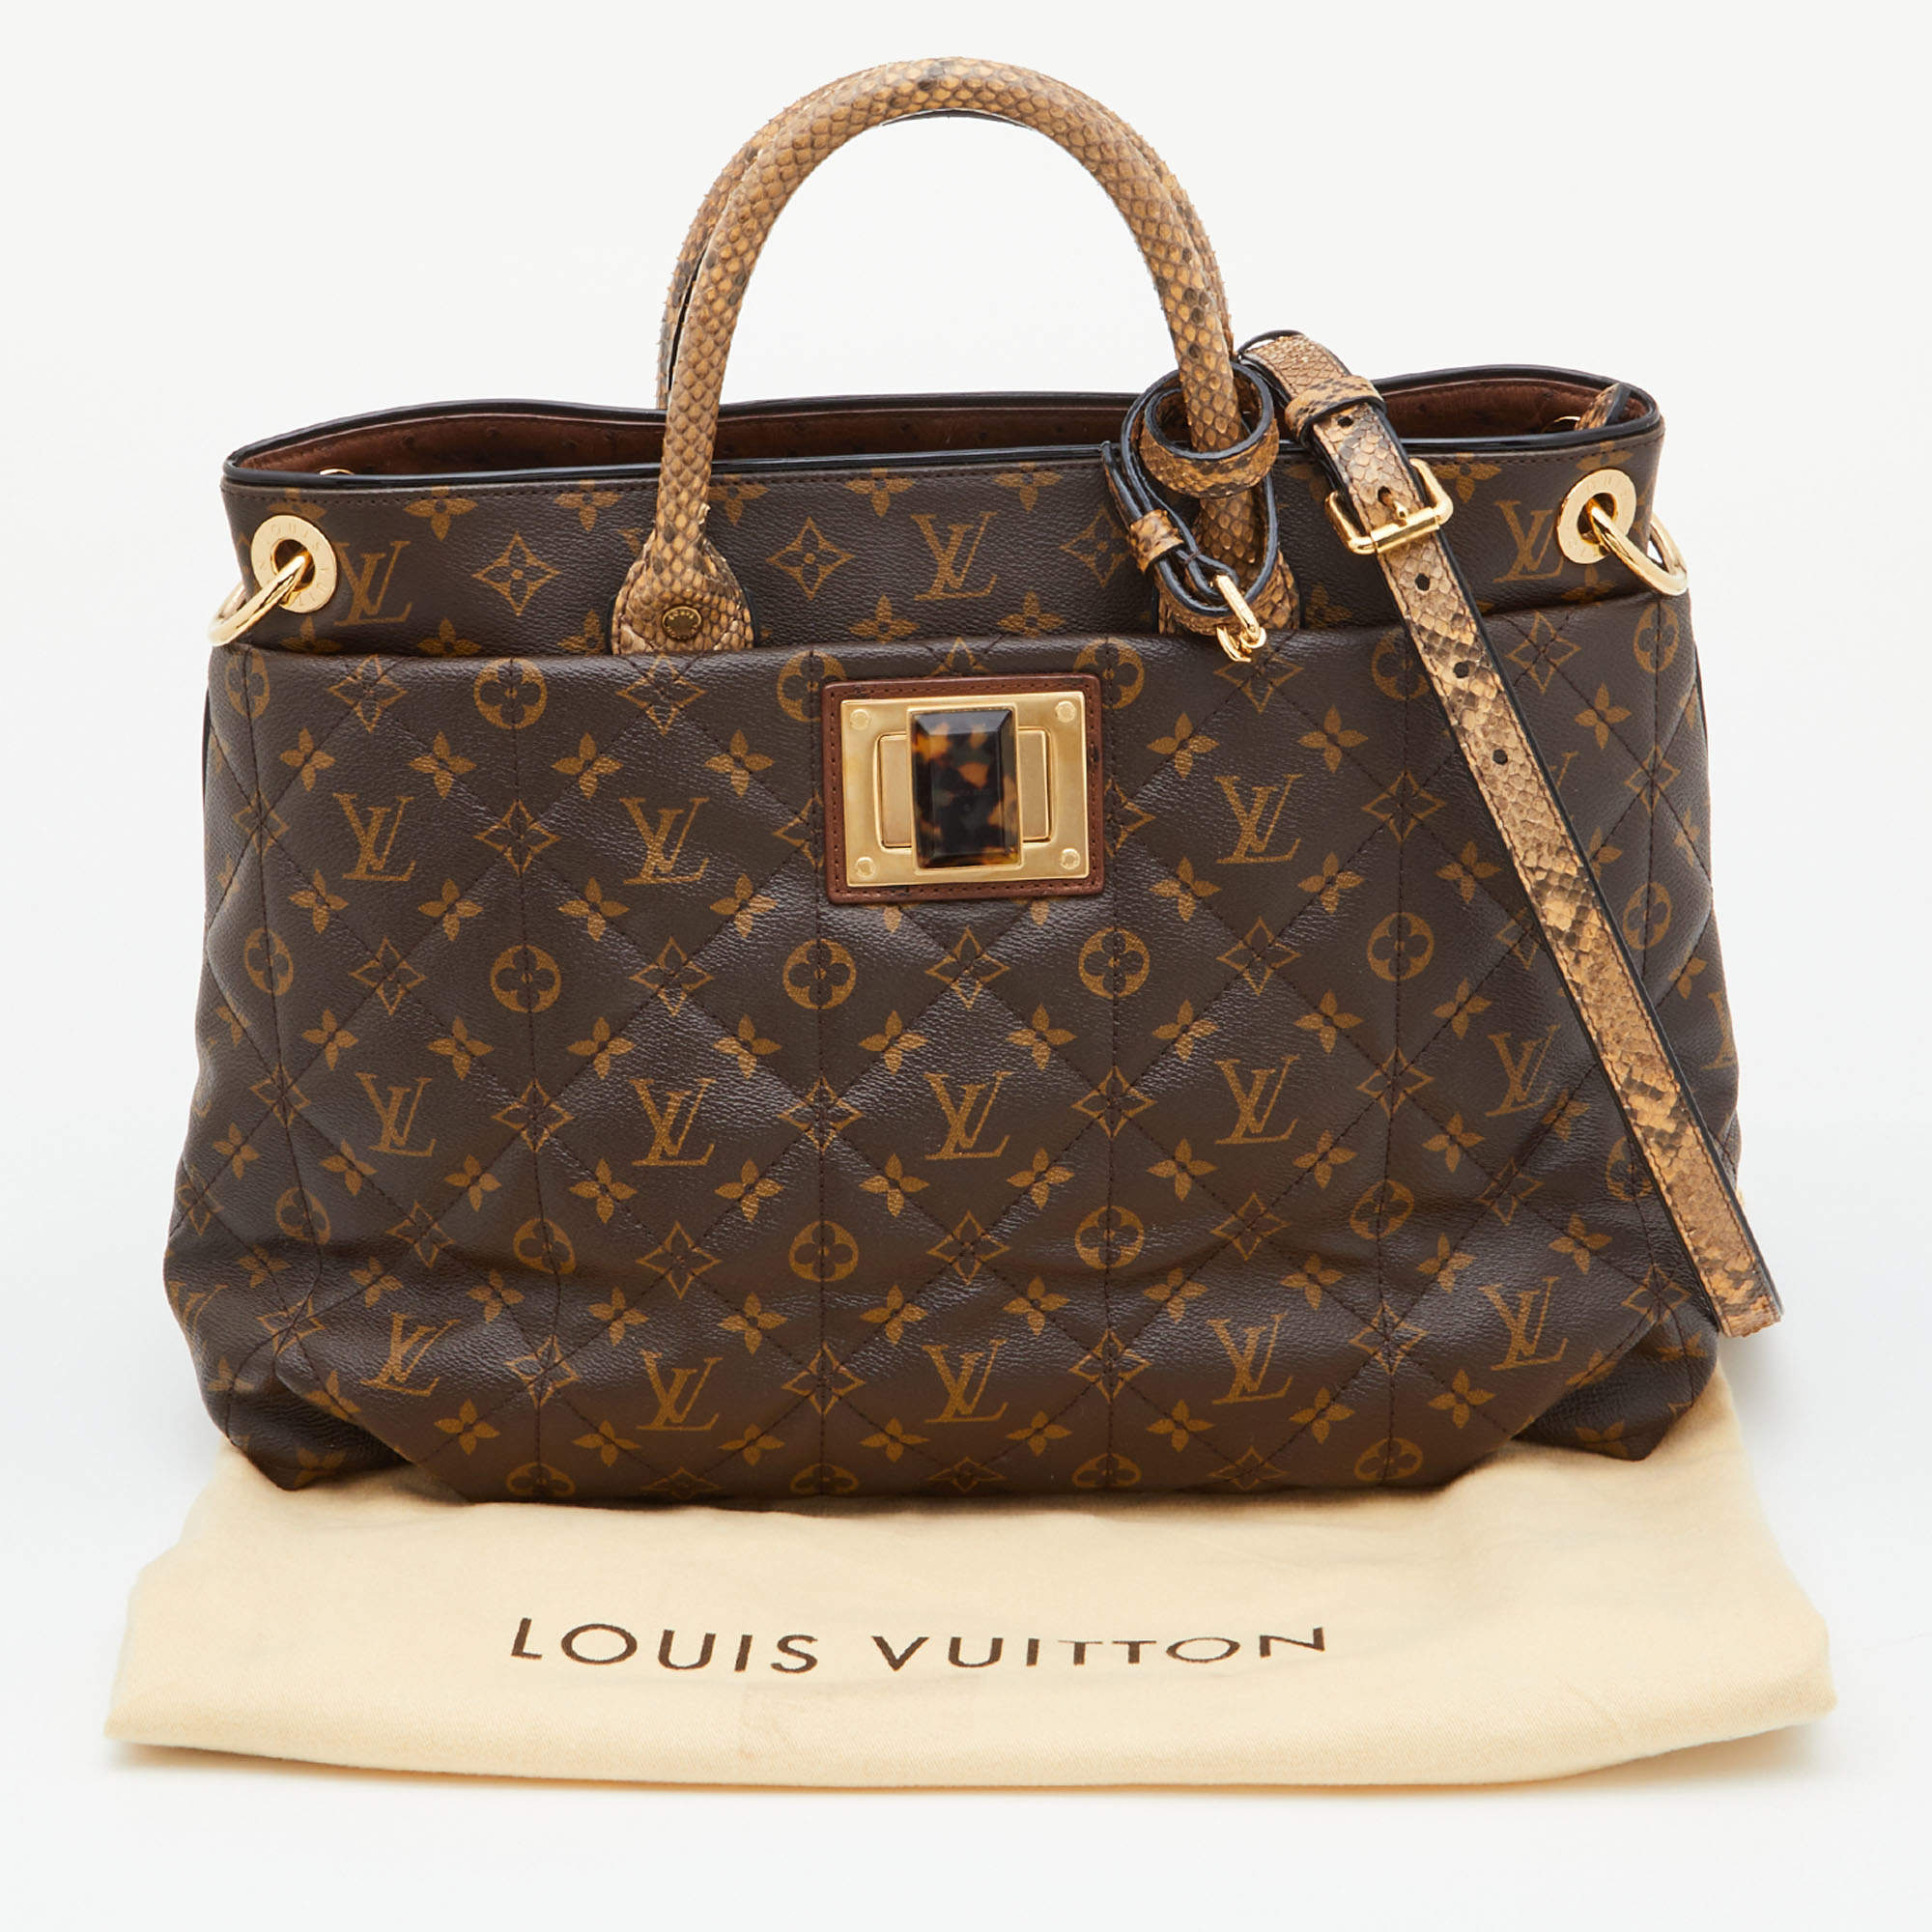 Louis Vuitton RARE Limited Edition Black and White Damier Canvas